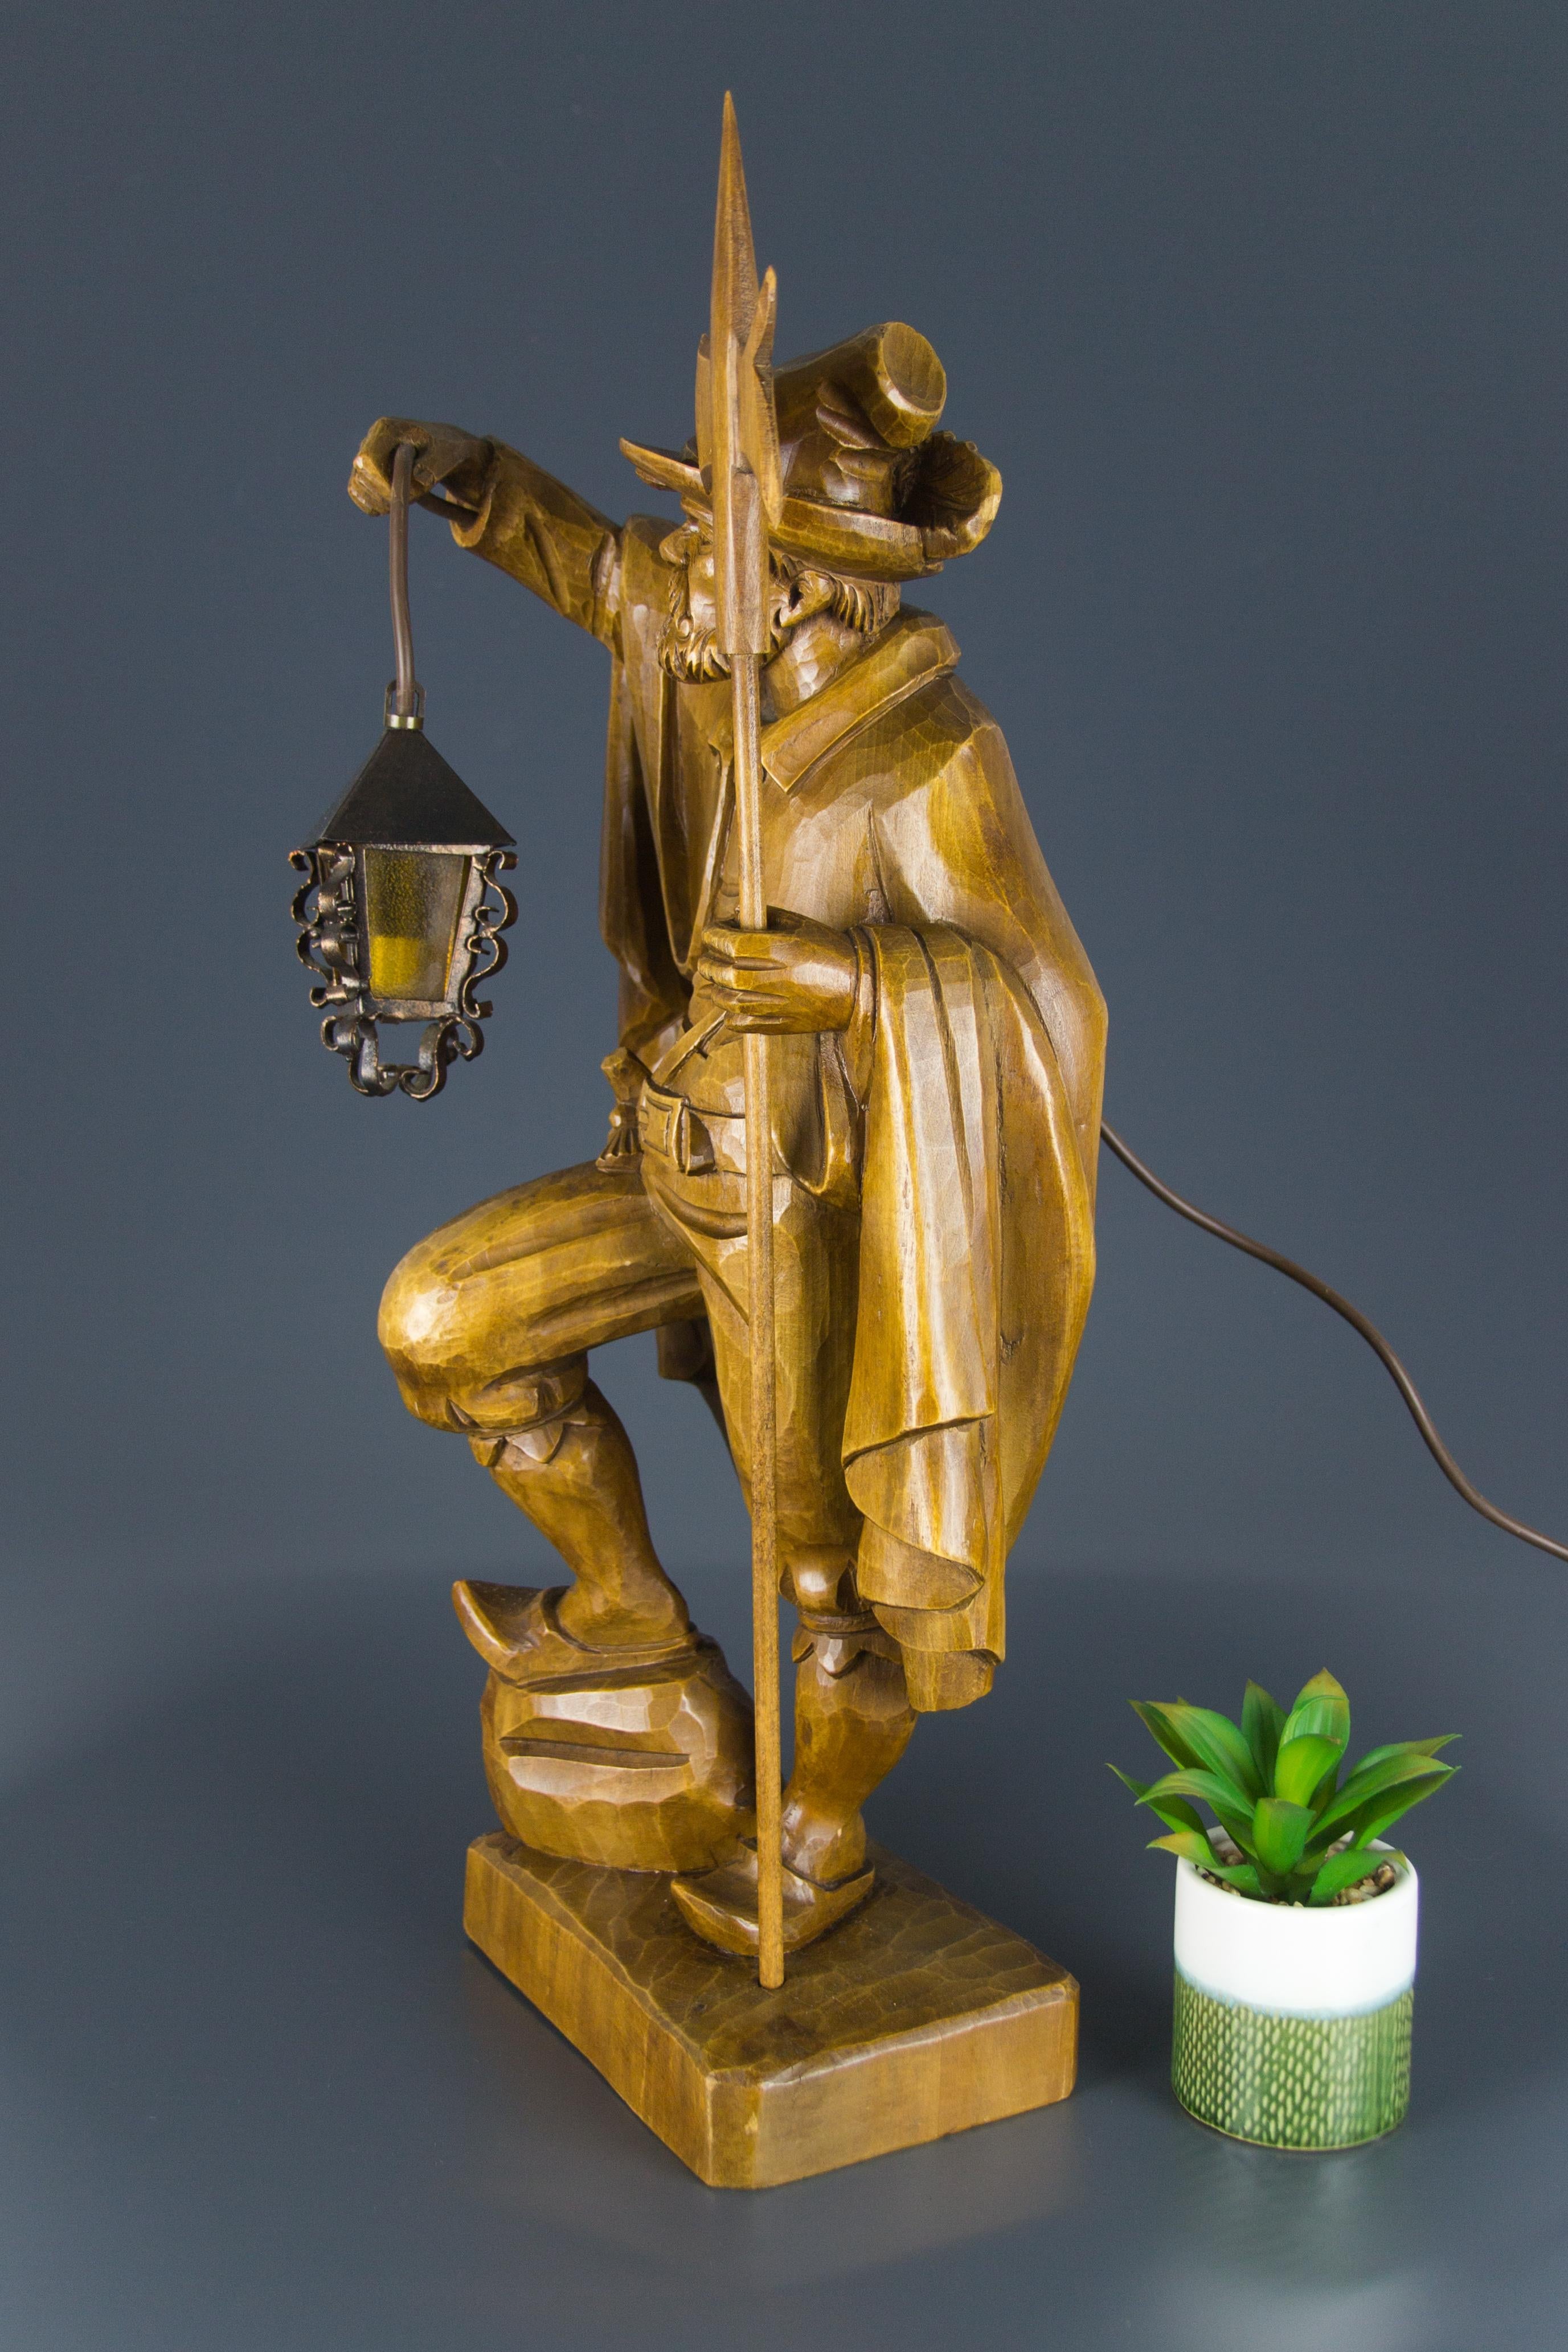 German Hand Carved Wooden Figurative Sculpture Lamp Night Watchman with Lantern 1